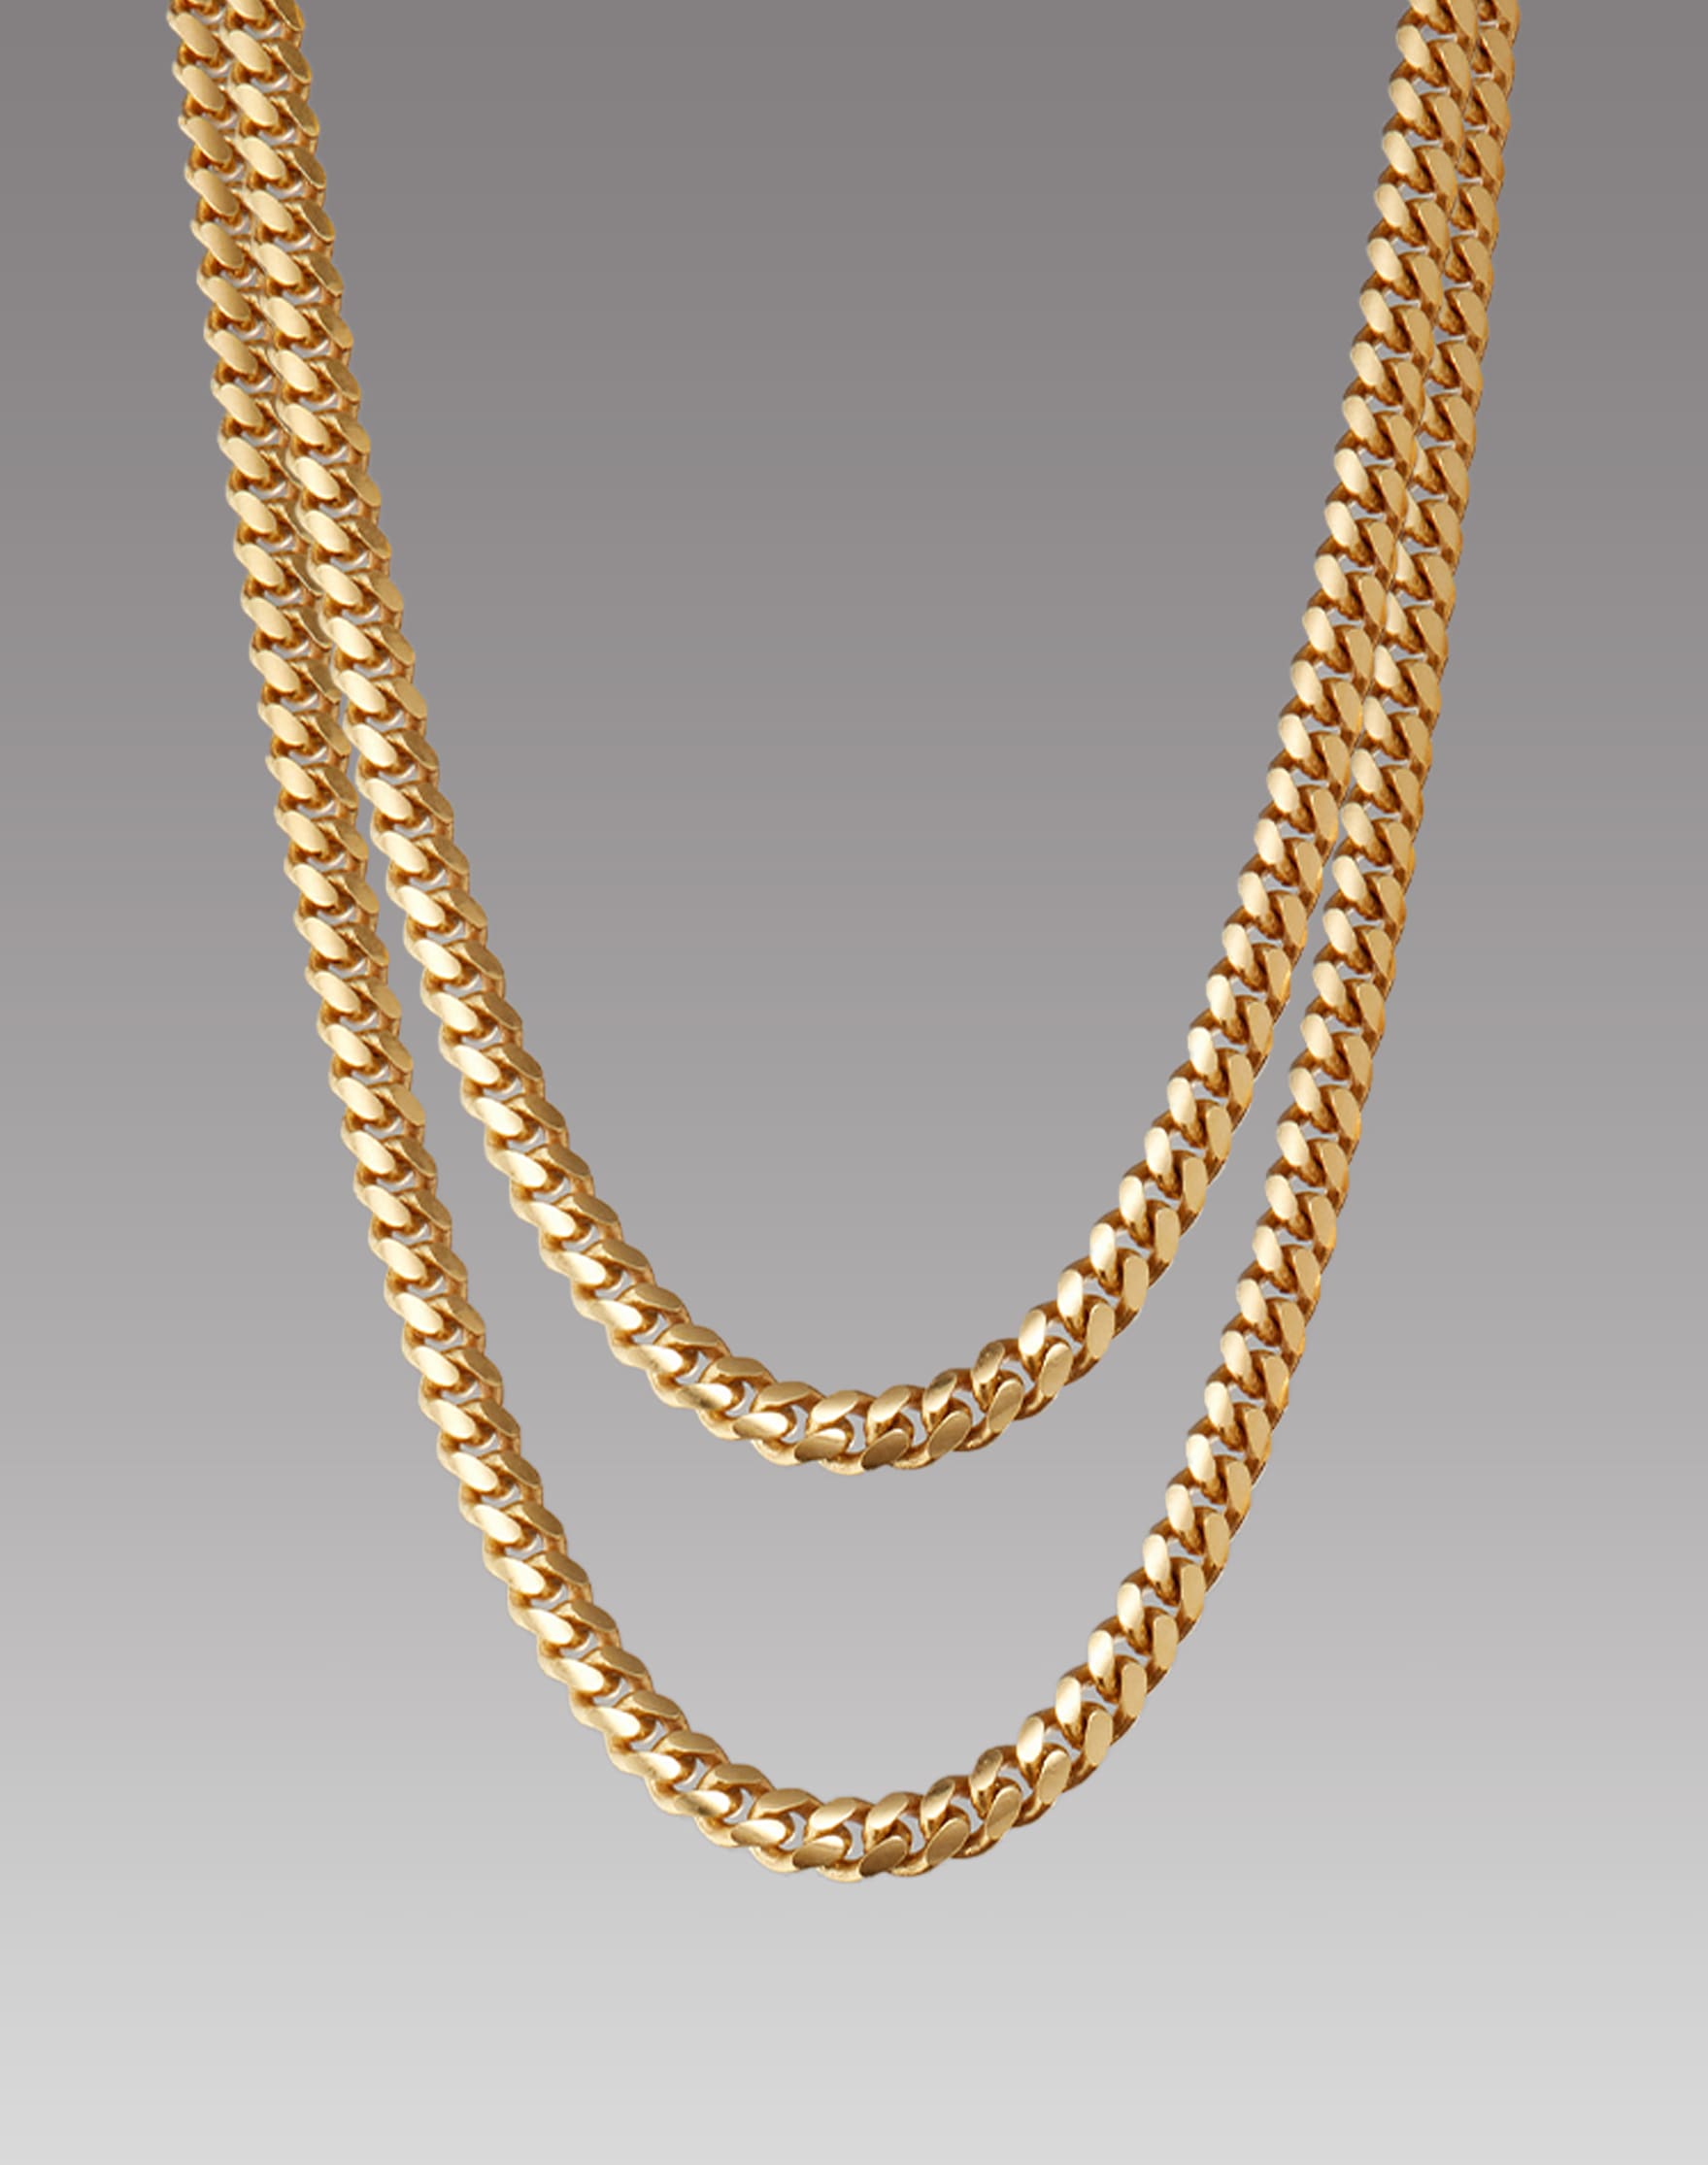 Image Cuban Chain Stack - 3mm Gold - Made with Precious Metals